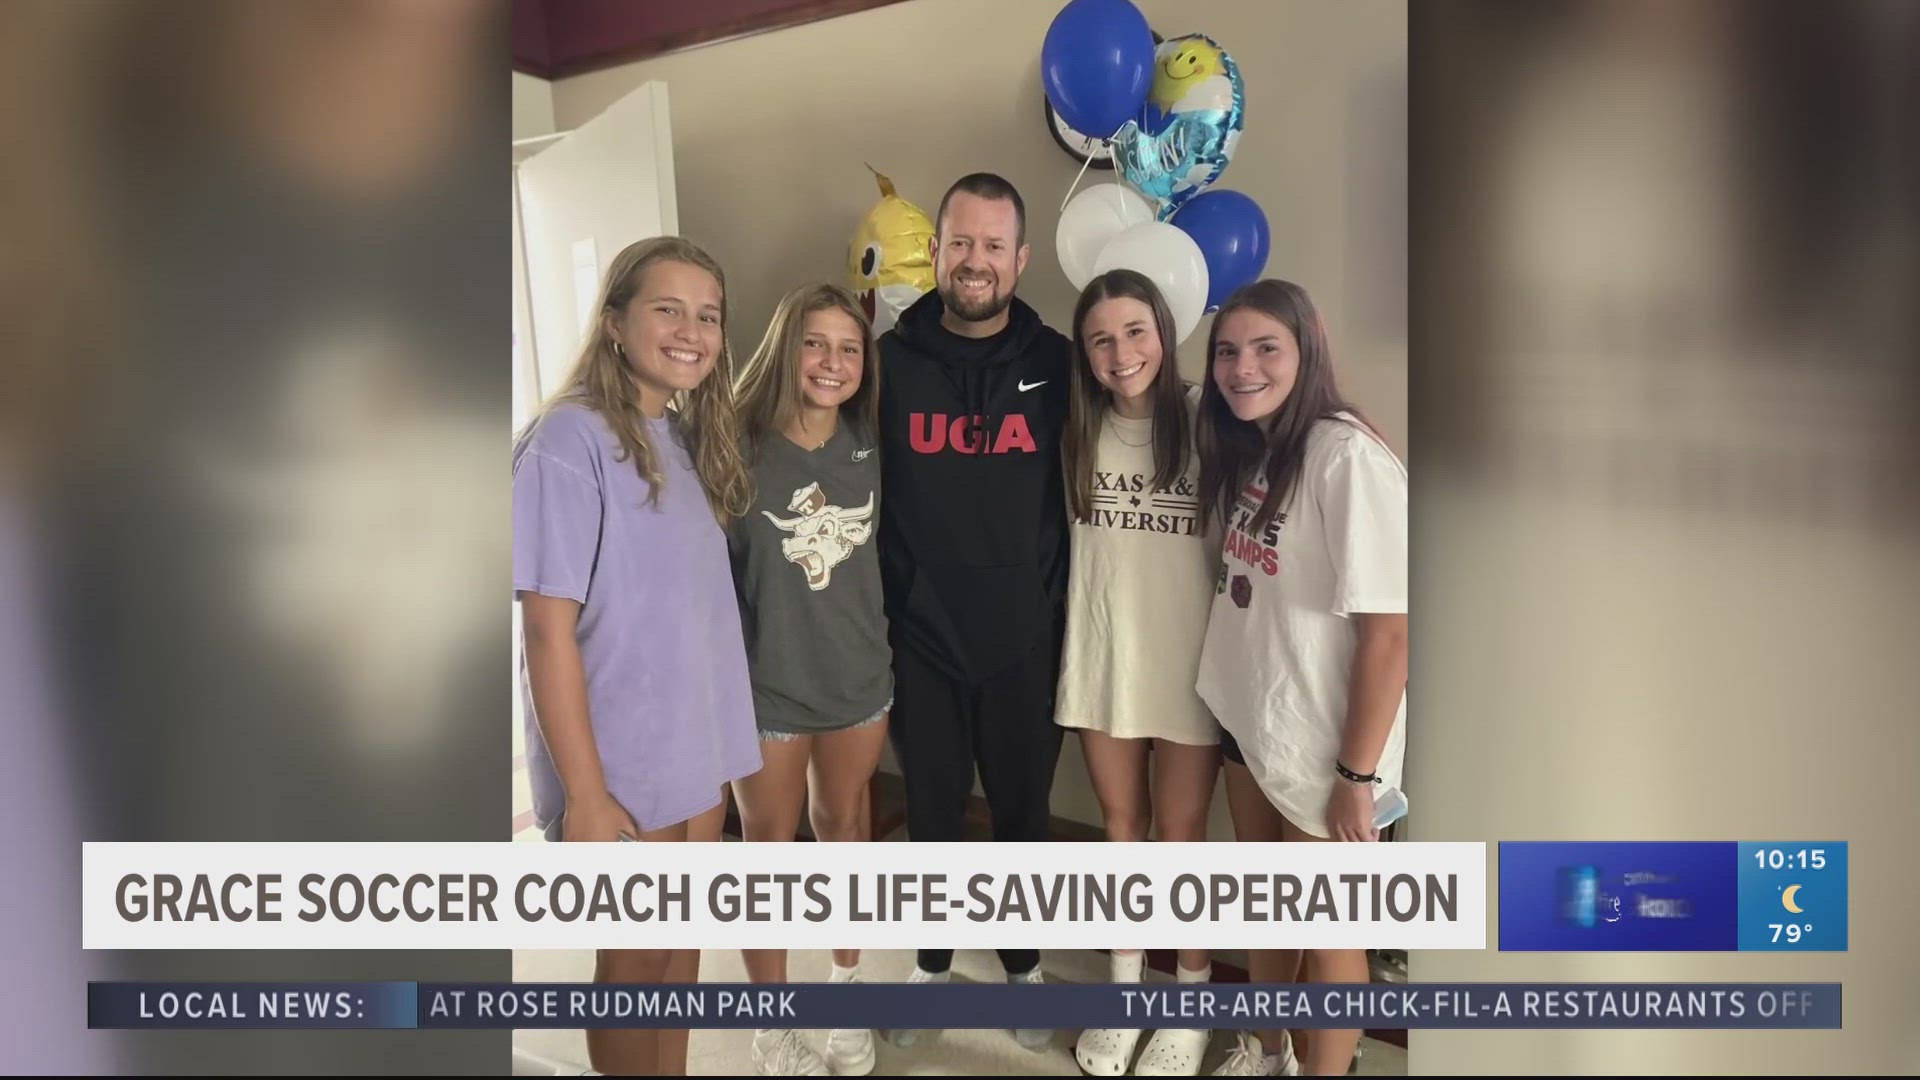 Chris Hemphill was waiting for a lifeline, and then one morning he received an important call. The help he needed ultimately came from a player's parent.